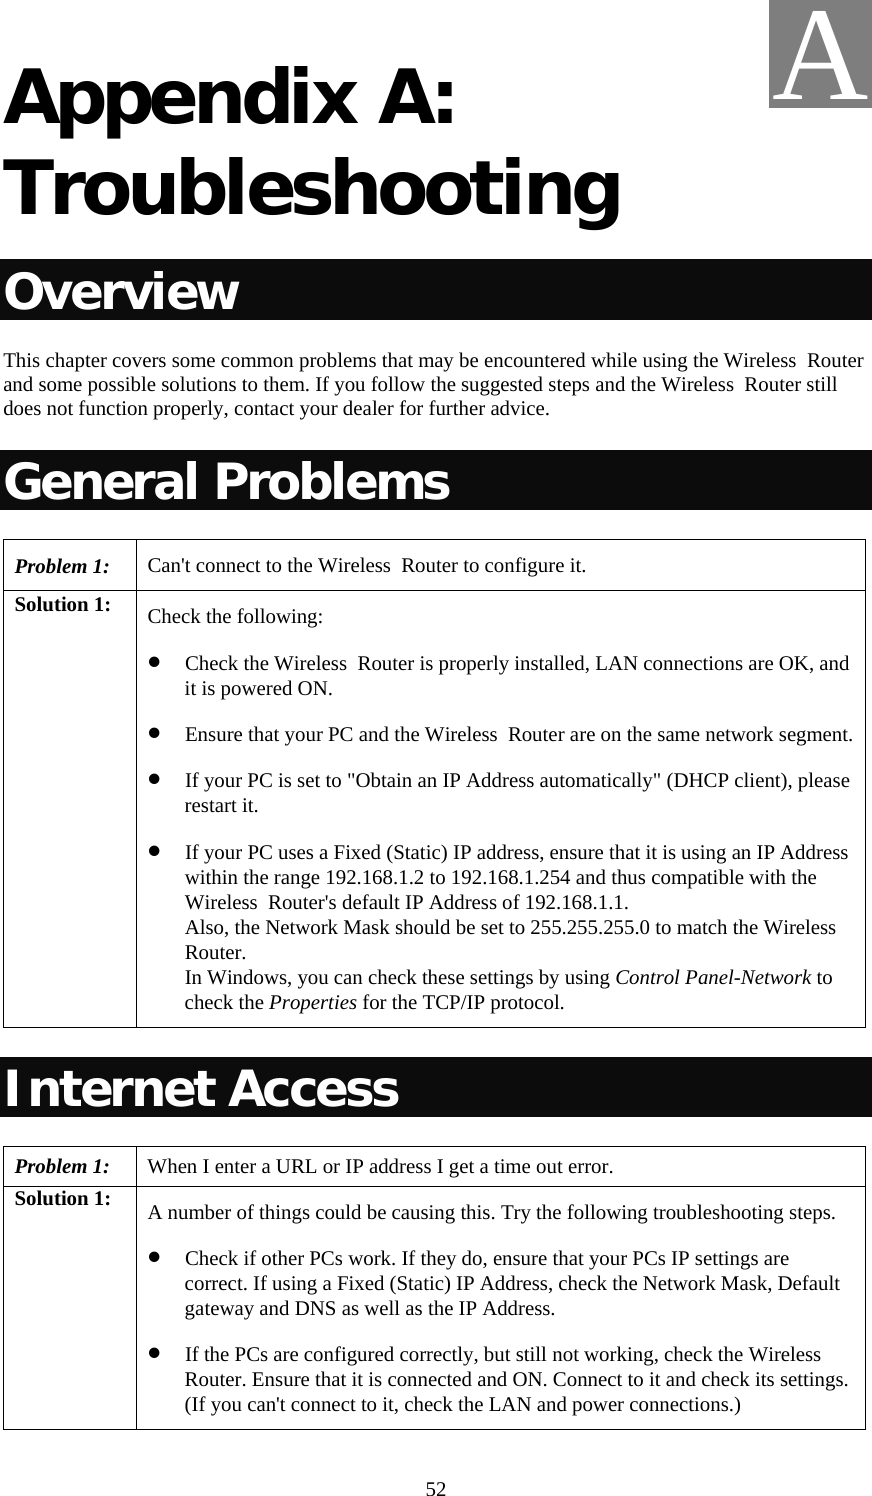   52 Appendix A: Troubleshooting Overview This chapter covers some common problems that may be encountered while using the Wireless  Router and some possible solutions to them. If you follow the suggested steps and the Wireless  Router still does not function properly, contact your dealer for further advice. General Problems Problem 1:  Can&apos;t connect to the Wireless  Router to configure it. Solution 1:  Check the following: • Check the Wireless  Router is properly installed, LAN connections are OK, and it is powered ON. • Ensure that your PC and the Wireless  Router are on the same network segment. • If your PC is set to &quot;Obtain an IP Address automatically&quot; (DHCP client), please restart it. • If your PC uses a Fixed (Static) IP address, ensure that it is using an IP Address within the range 192.168.1.2 to 192.168.1.254 and thus compatible with the Wireless  Router&apos;s default IP Address of 192.168.1.1.  Also, the Network Mask should be set to 255.255.255.0 to match the Wireless  Router. In Windows, you can check these settings by using Control Panel-Network to check the Properties for the TCP/IP protocol.  Internet Access Problem 1: When I enter a URL or IP address I get a time out error. Solution 1:  A number of things could be causing this. Try the following troubleshooting steps. • Check if other PCs work. If they do, ensure that your PCs IP settings are correct. If using a Fixed (Static) IP Address, check the Network Mask, Default gateway and DNS as well as the IP Address. • If the PCs are configured correctly, but still not working, check the Wireless  Router. Ensure that it is connected and ON. Connect to it and check its settings. (If you can&apos;t connect to it, check the LAN and power connections.) A